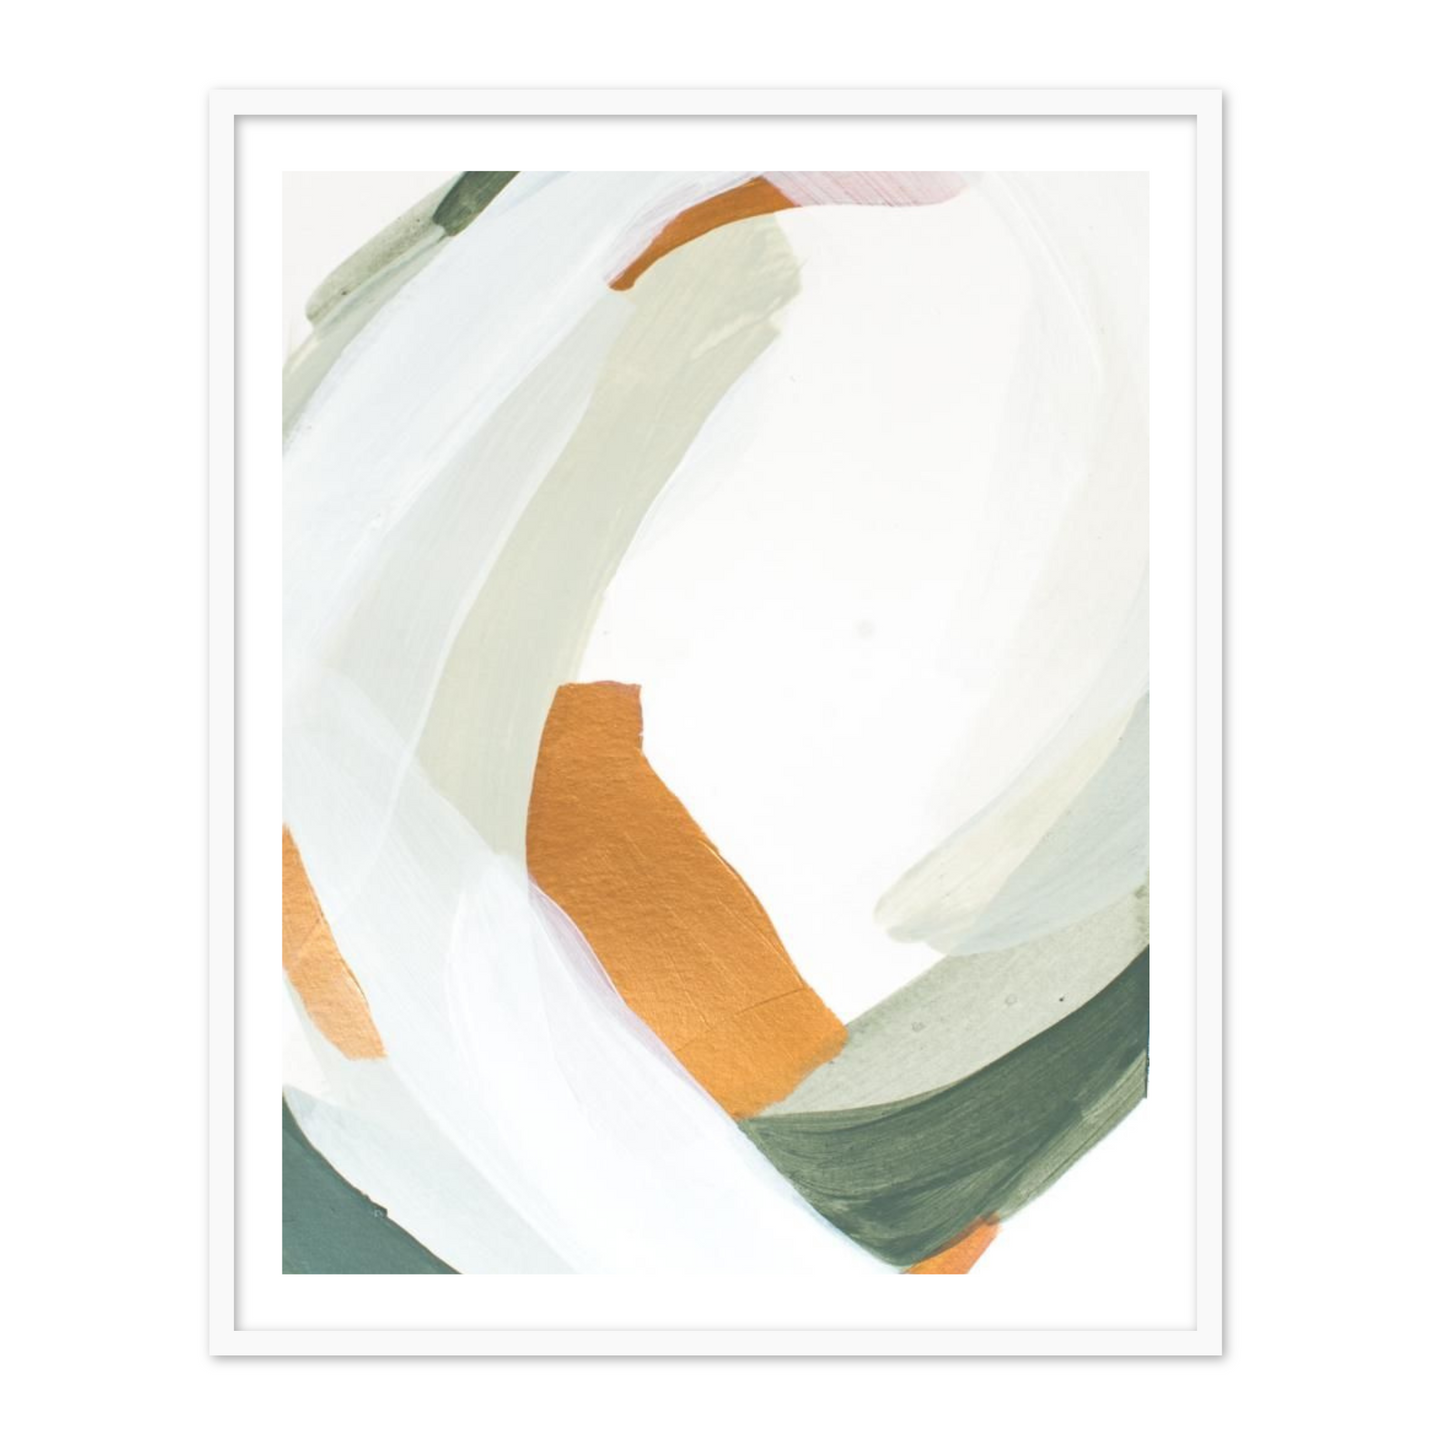 Minimalistic Abstract Artwork for Home decor